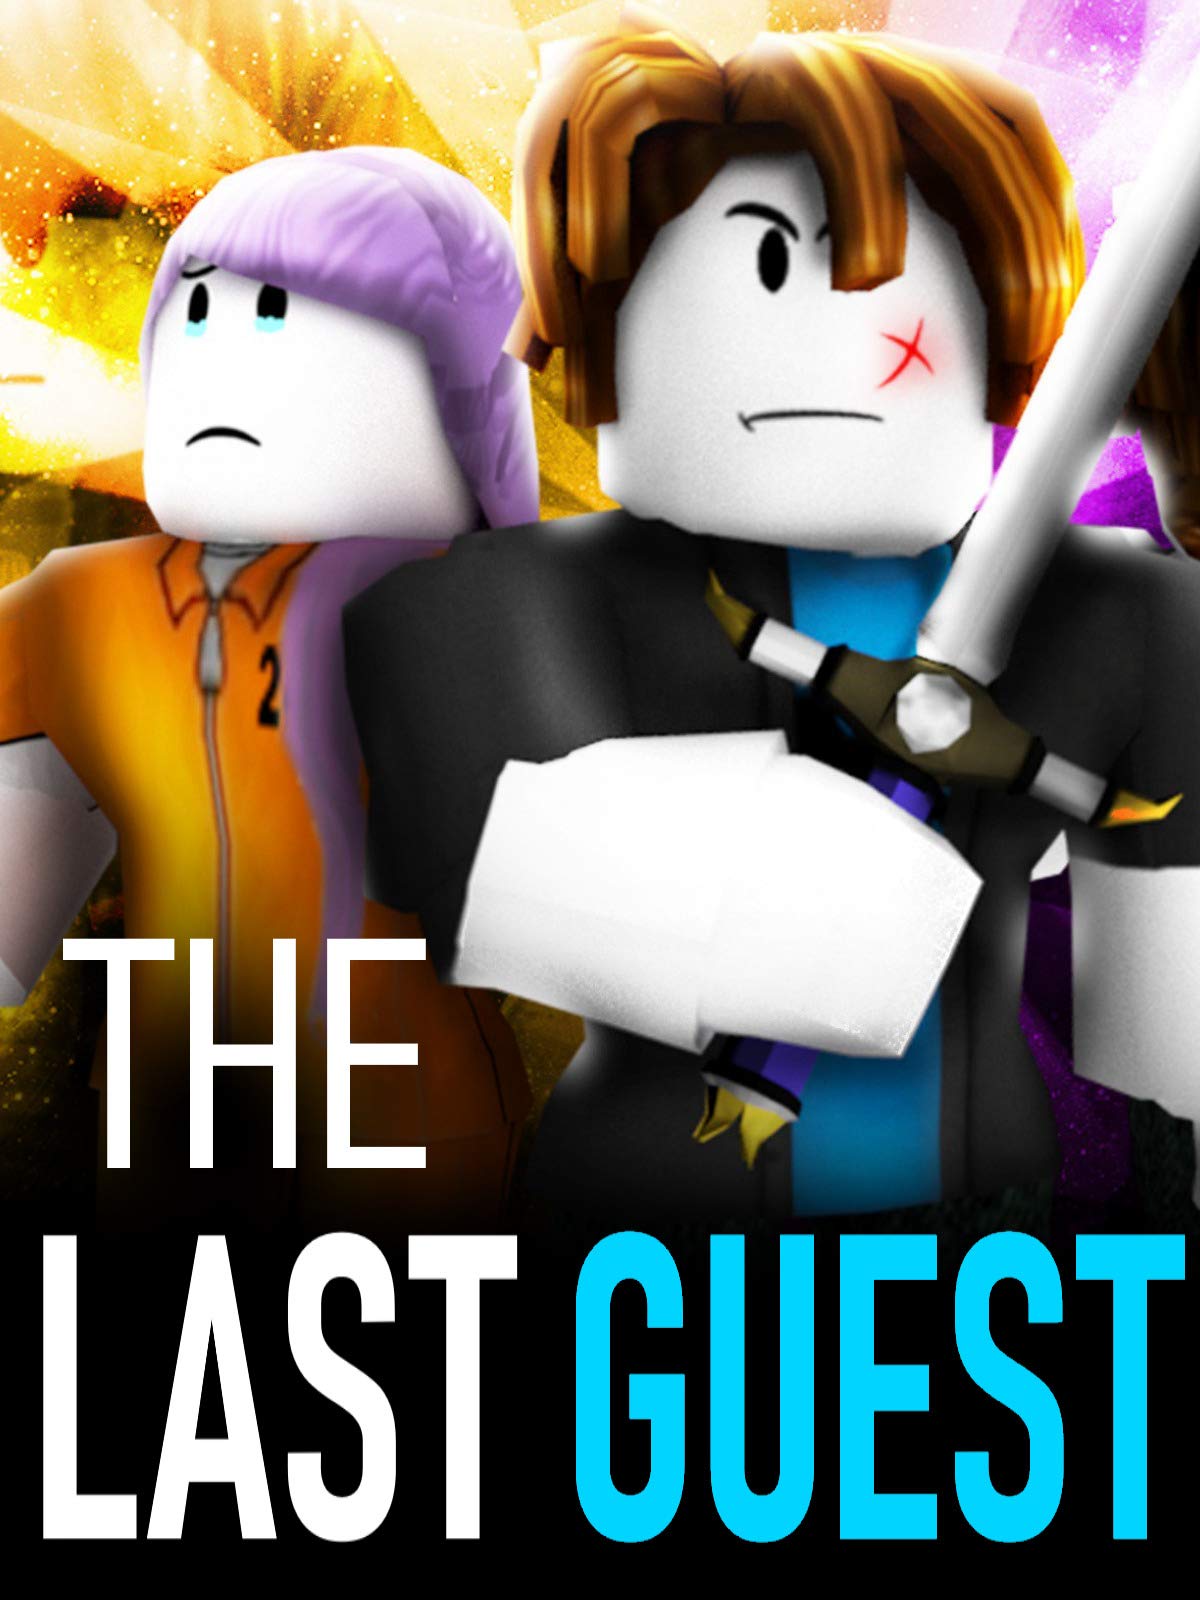 rip guest roblox